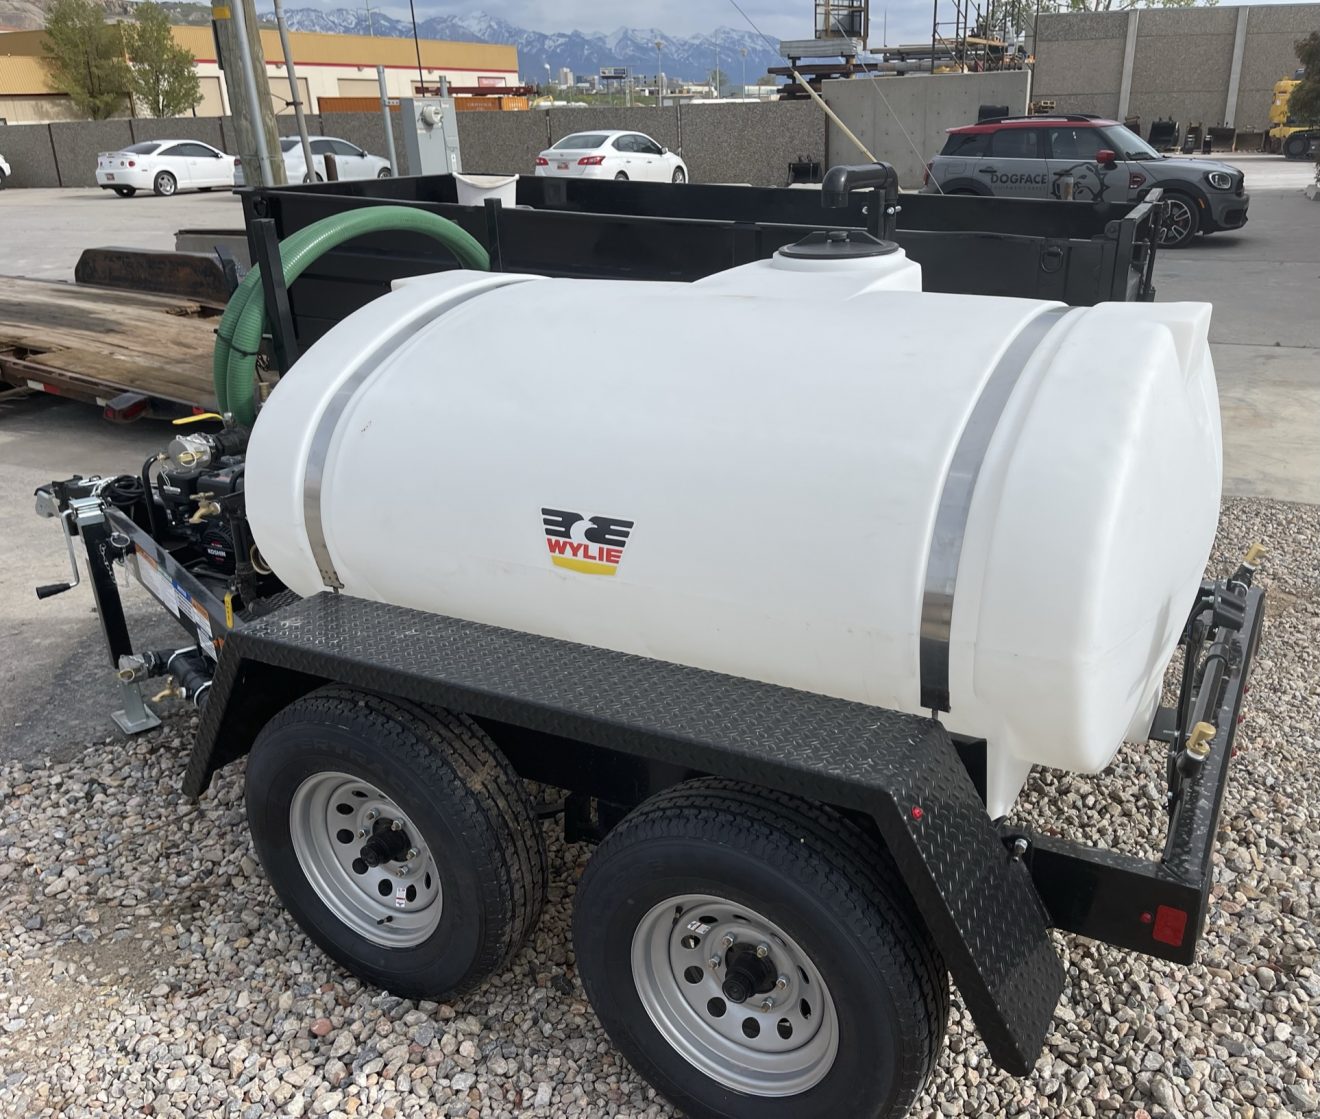 Willie 500 gallon water trailers